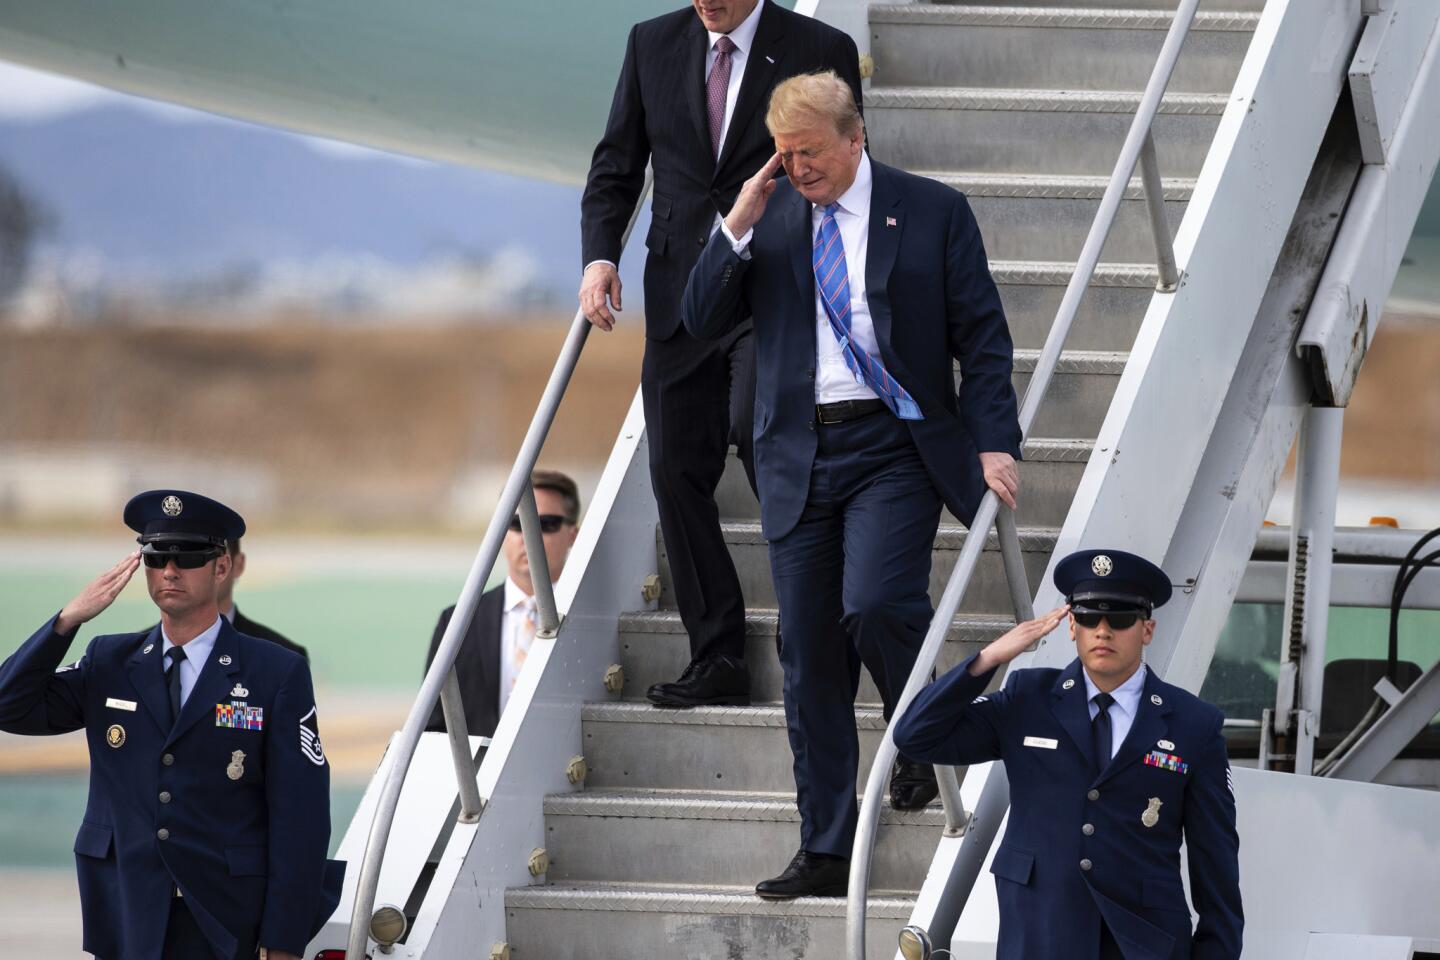 President Trump and House Minority Leader Rep. Kevin McCarthy disembark from Air Force One at Los Angeles International Airport.